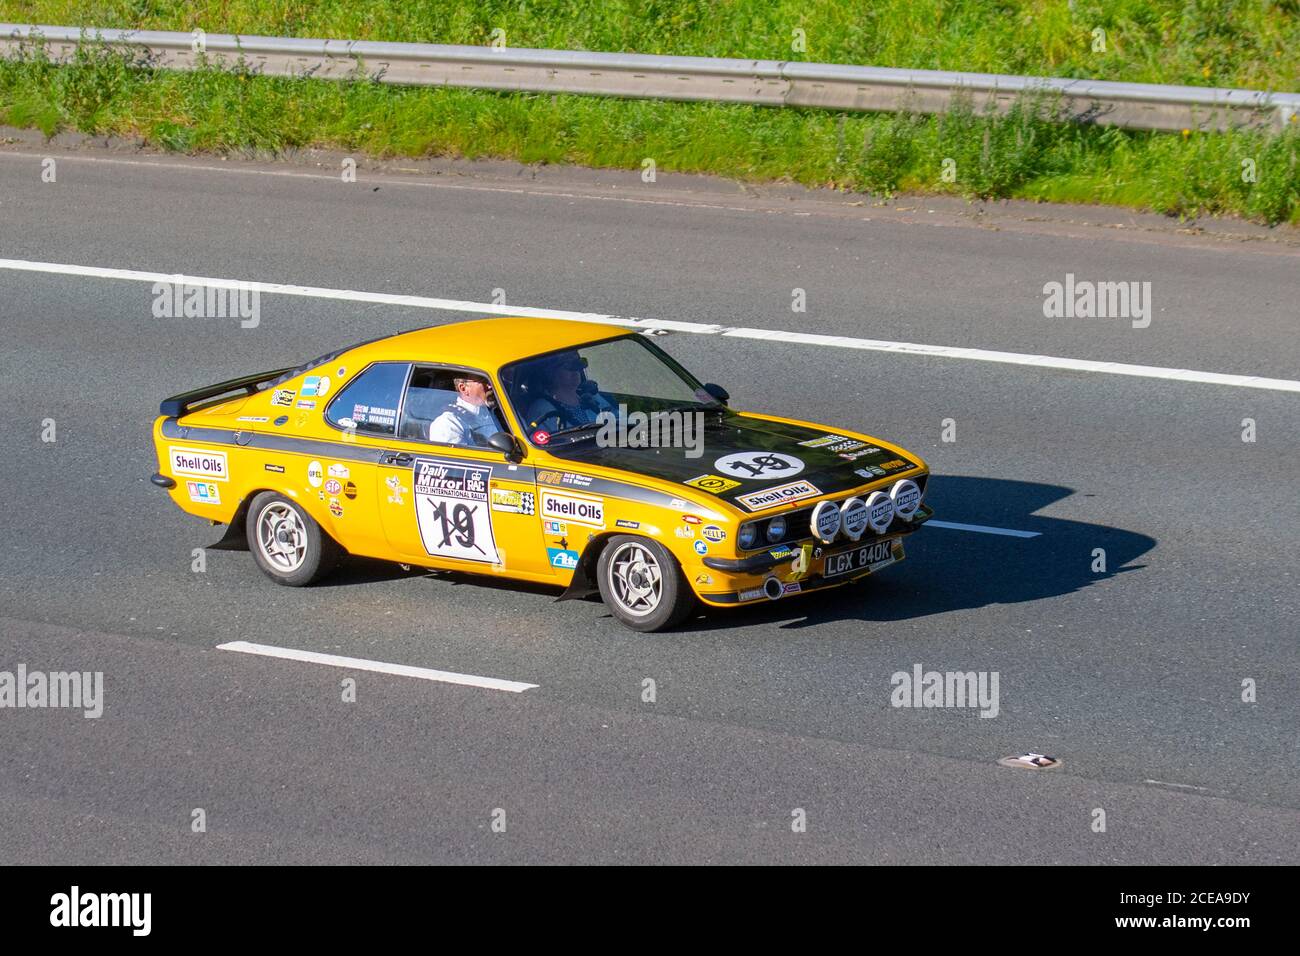 1992 70s seventies yellow Opel Manta motorsport No.19 1897cc petrol  sponsored racing car with motorsport decals; Vehicular traffic moving vehicles, cars driving vehicle on UK roads, motors, motoring on the M6 motorway highway network. Stock Photo